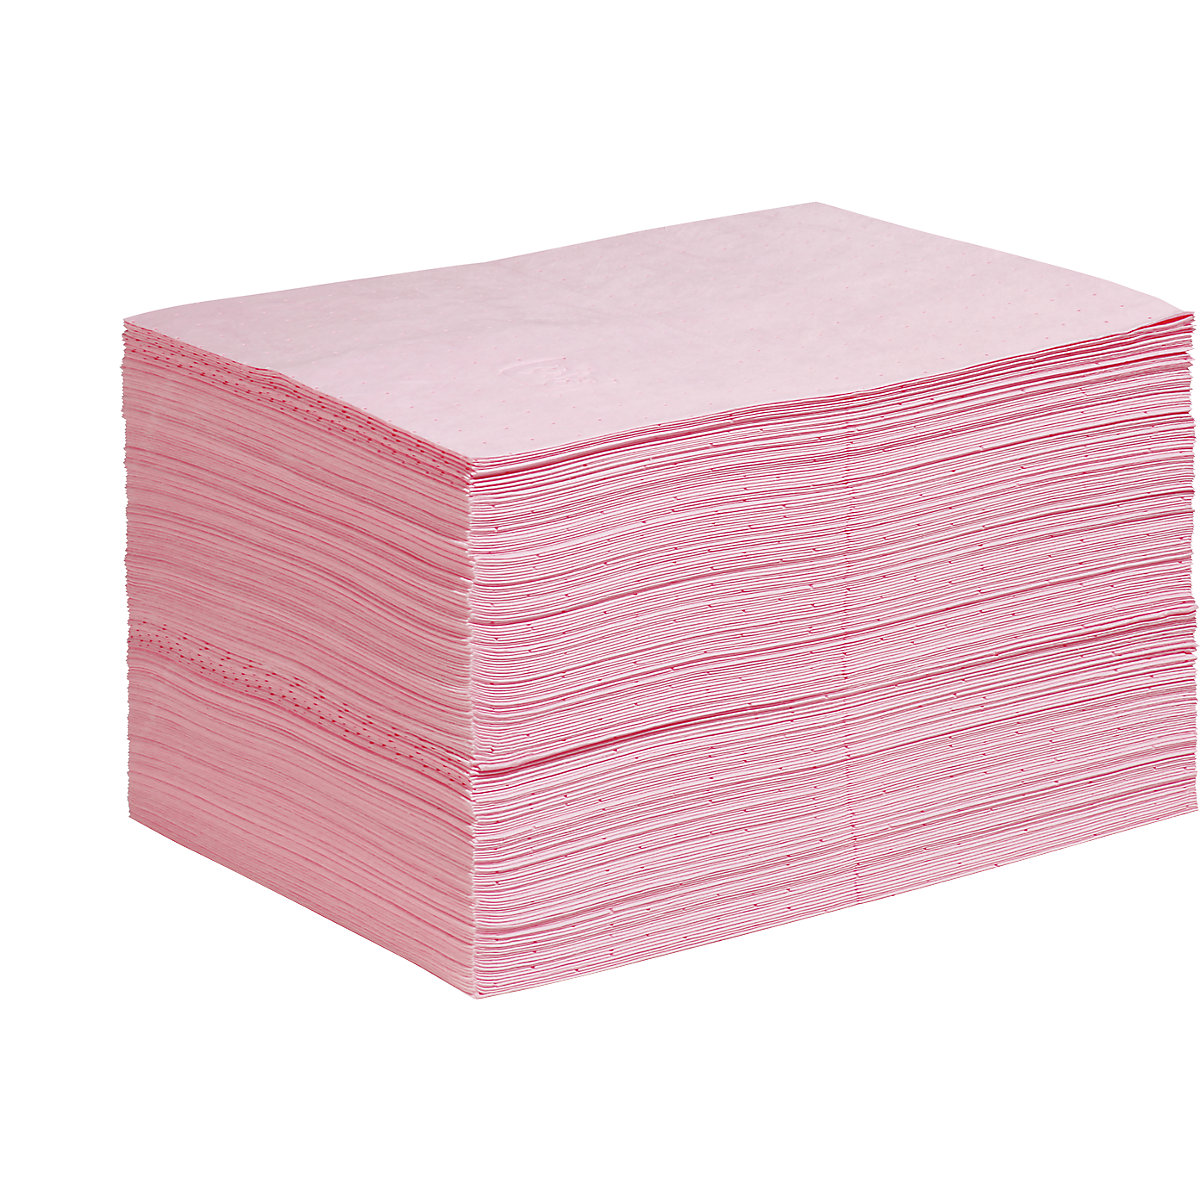 Oil-Only absorbent sheeting mat – PIG: lightweight version, pack of 200